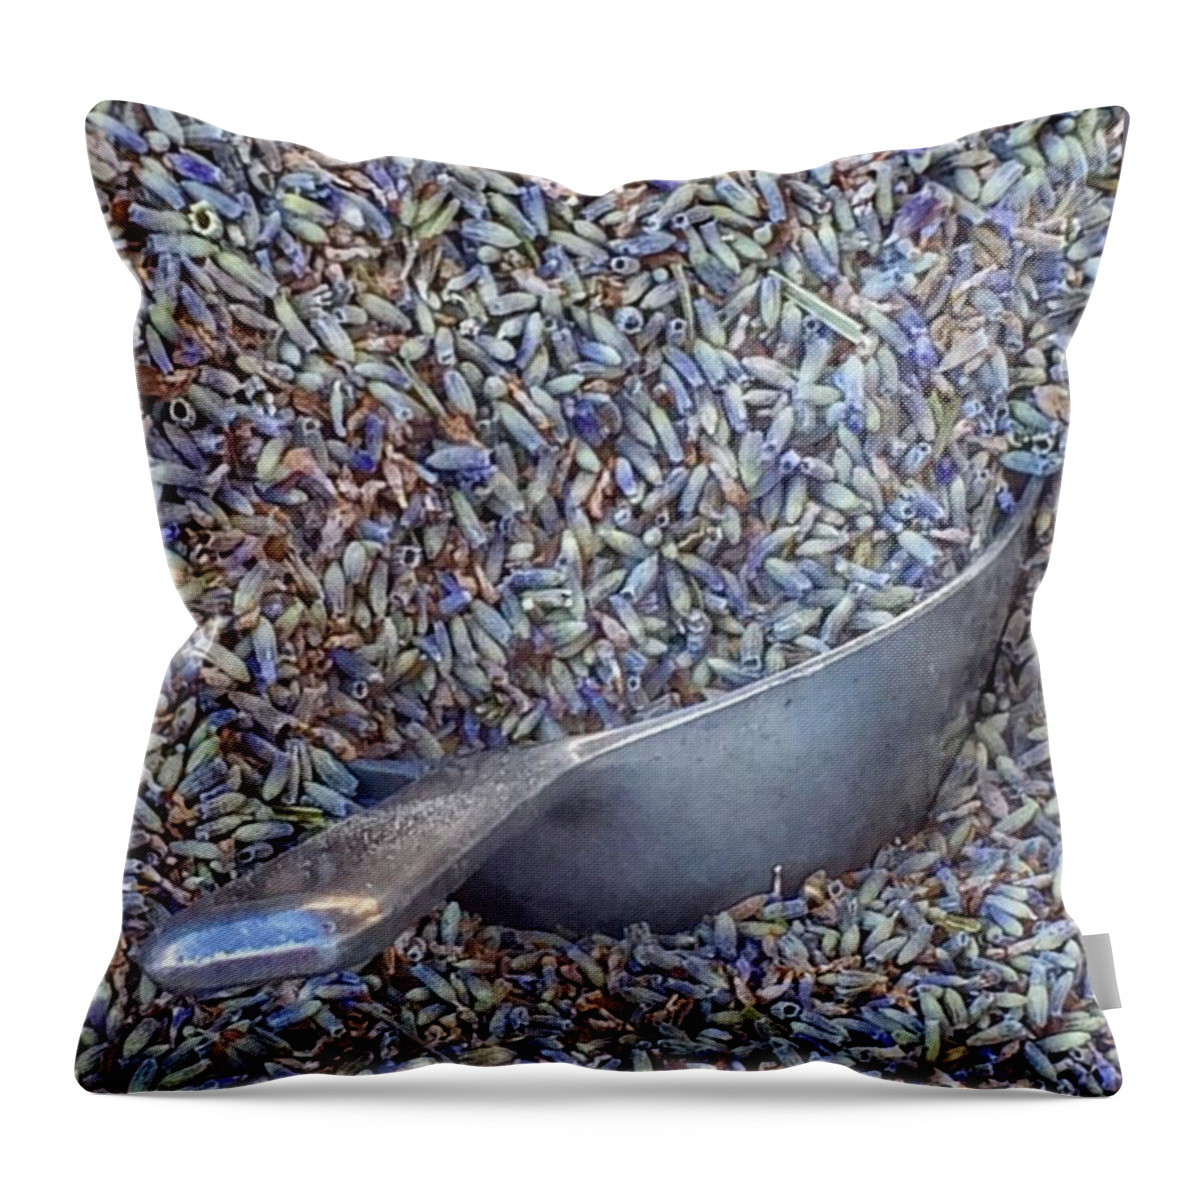 Lavender Bud Scoop Throw Pillow featuring the photograph Lavender Bud Scoop by Susan Garren